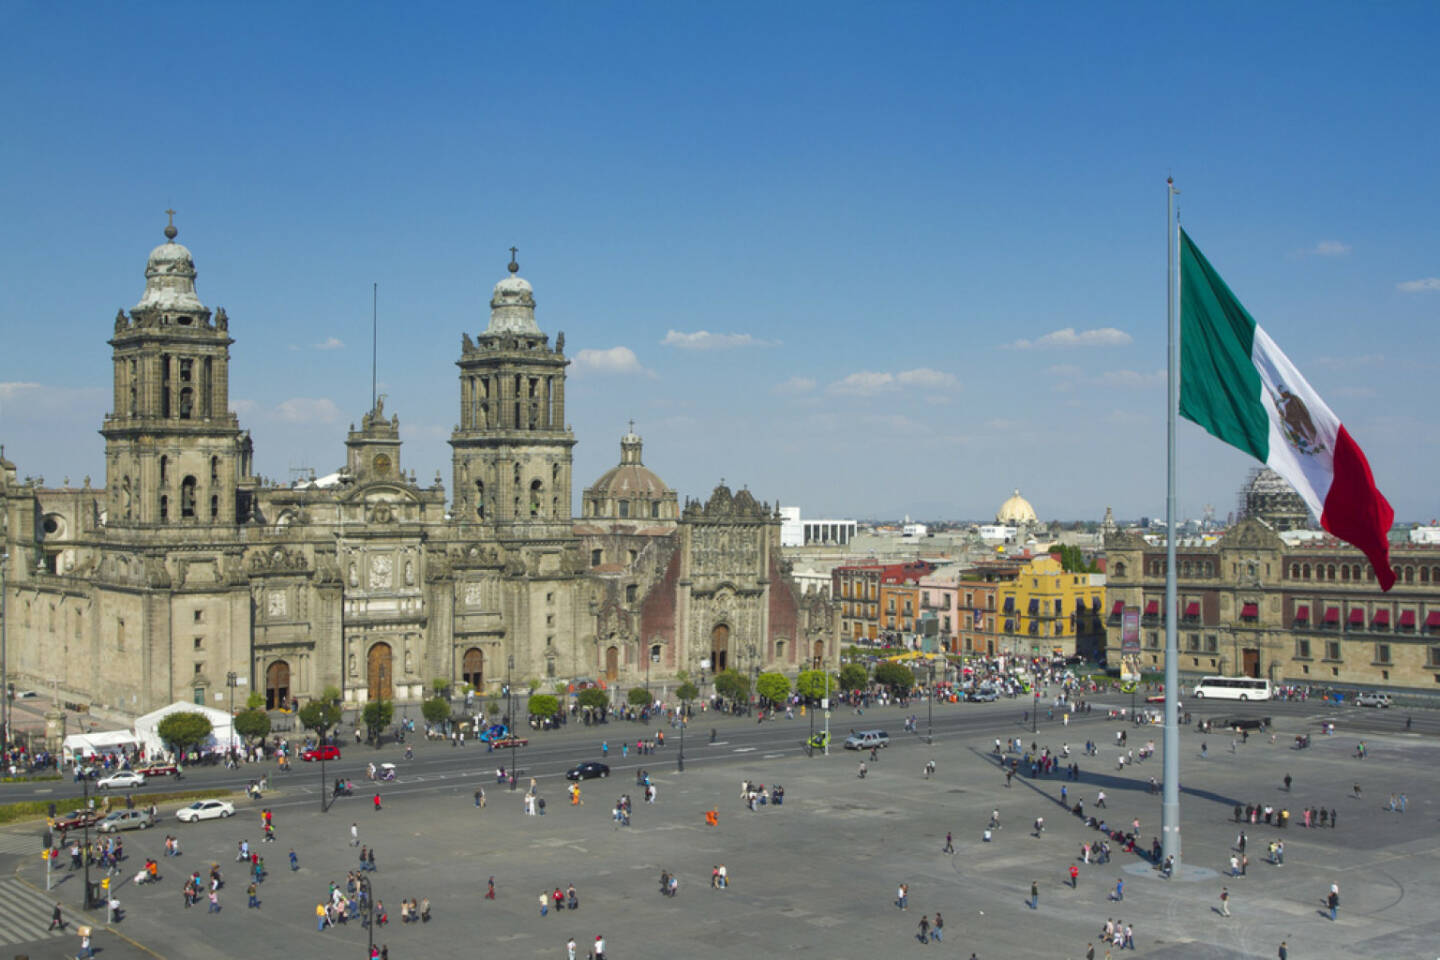 Mexico City, Mexico, Mexiko, http://www.shutterstock.com/de/pic-104705381/stock-photo-the-zocalo-in-mexico-city-with-the-cathedral-and-giant-flag-in-the-centre.html 